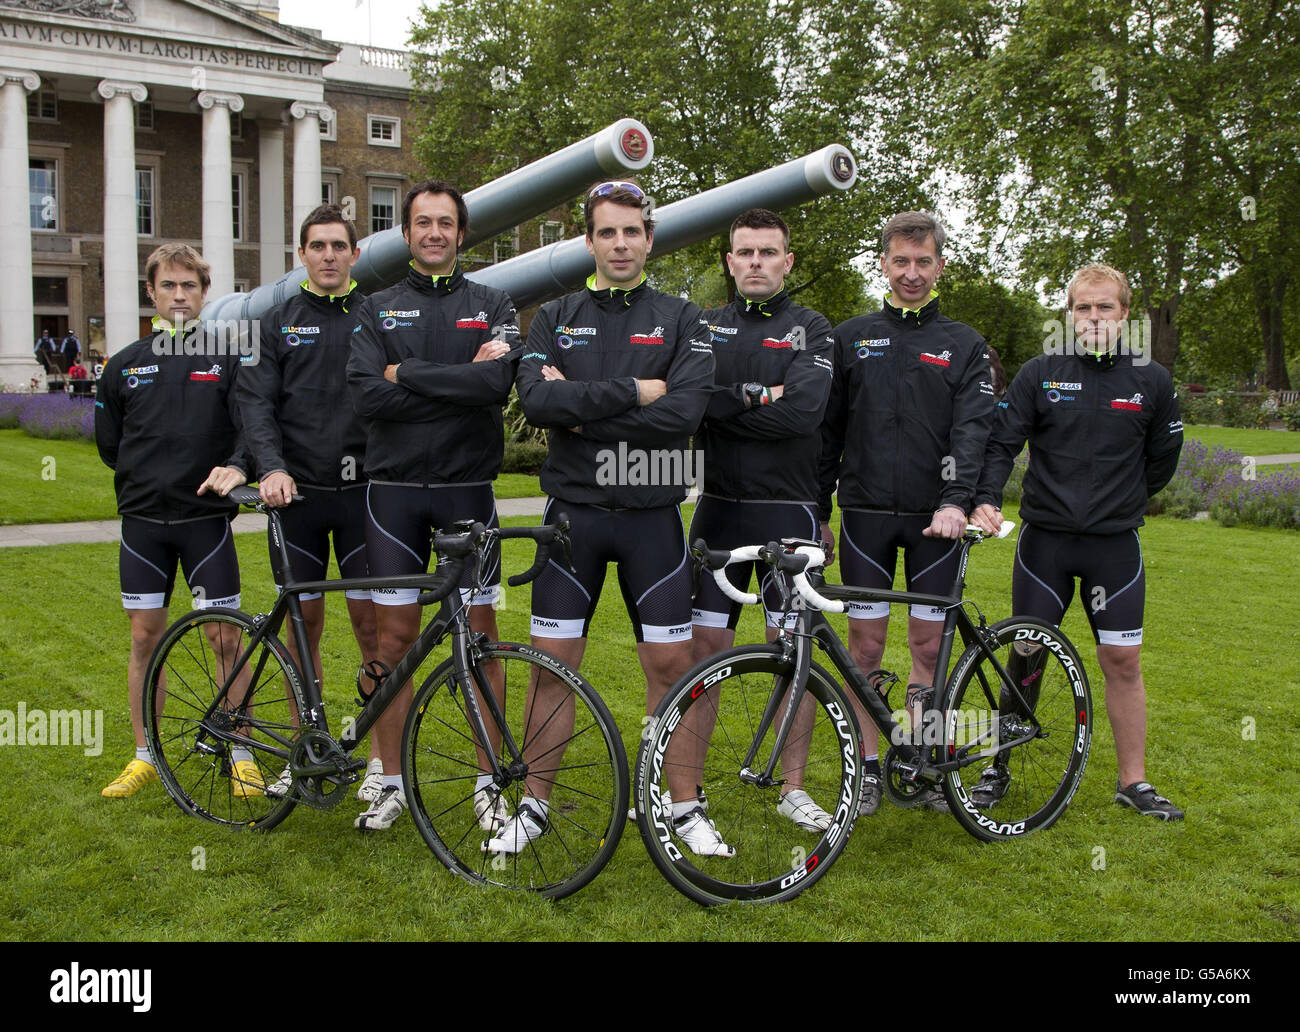 Television adventurer Mark Beaumont (centre) reveals the cycle team - (from left to right) wounded soldier Rupert 'Rab' Smedley, Peter Latham, wounded soldier Mike Westwell, Mark Beaumont, wounded soldier Don Maclean, Simon Oldfield and wounded soldier Craig Preece - who he will be leading during the Trois Etapes cycle race in France to raise funds for Walking With The Wounded, at the Imperial War Museum in London. Stock Photo